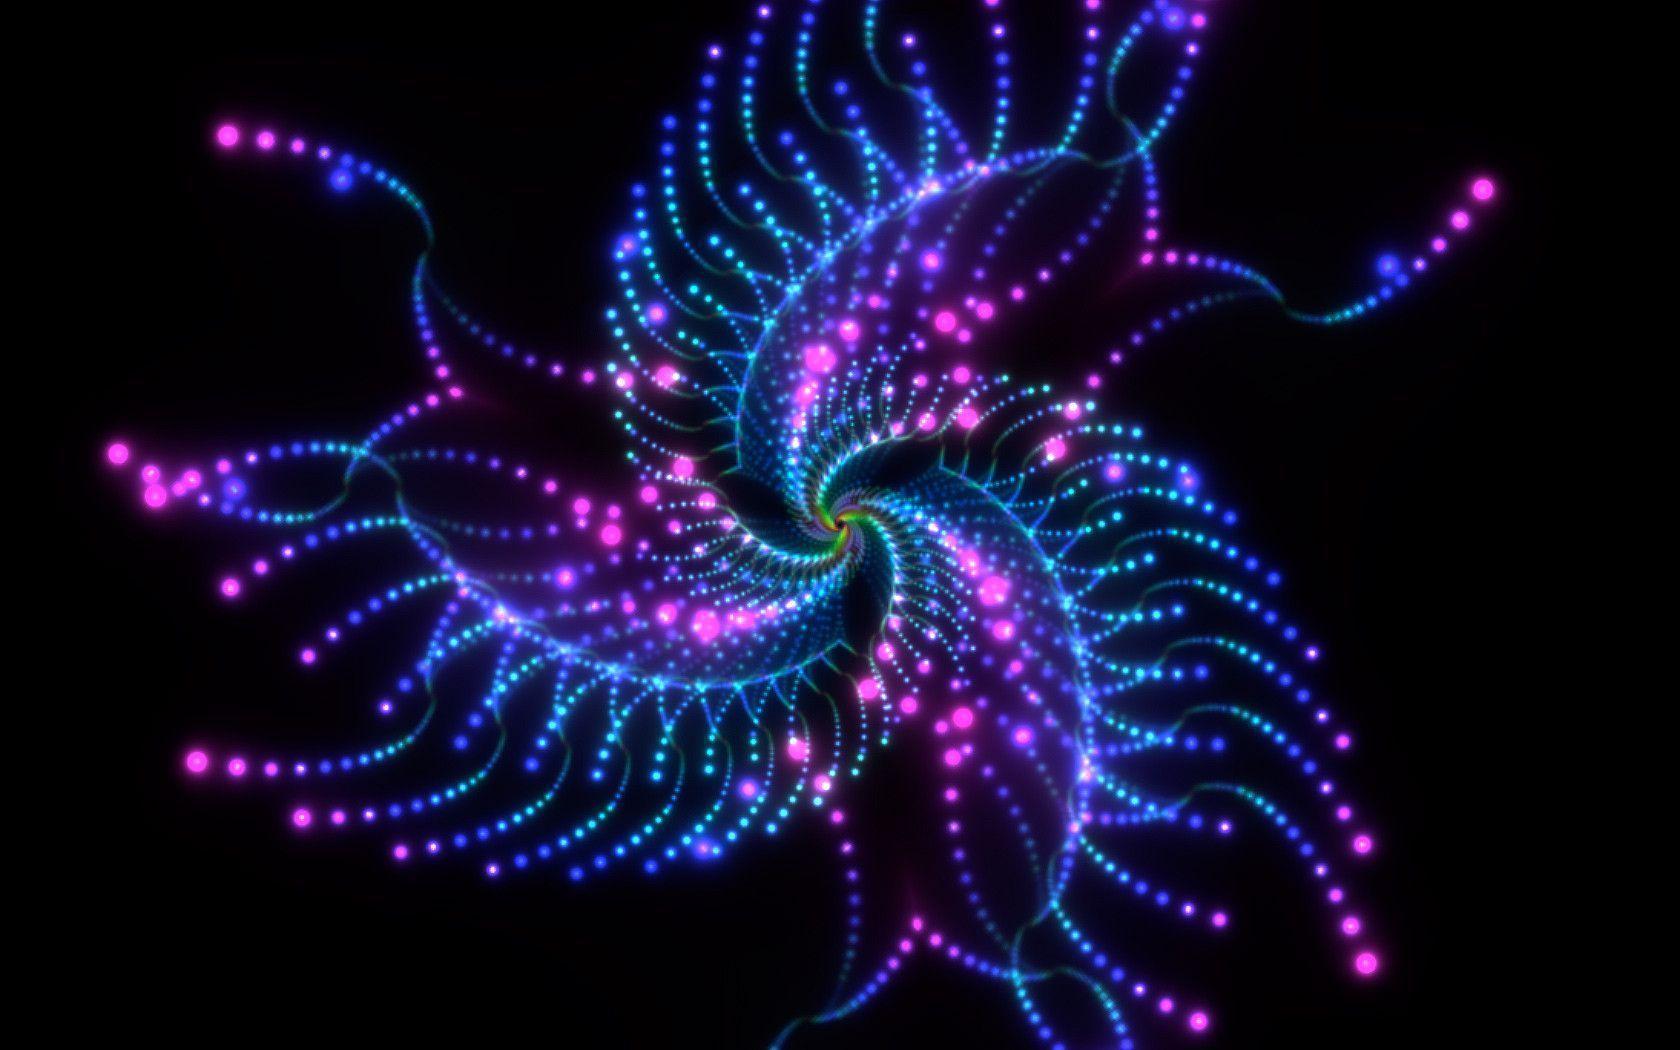 Create Psychedelic Desktop Picture With iTunes Firefly Forest